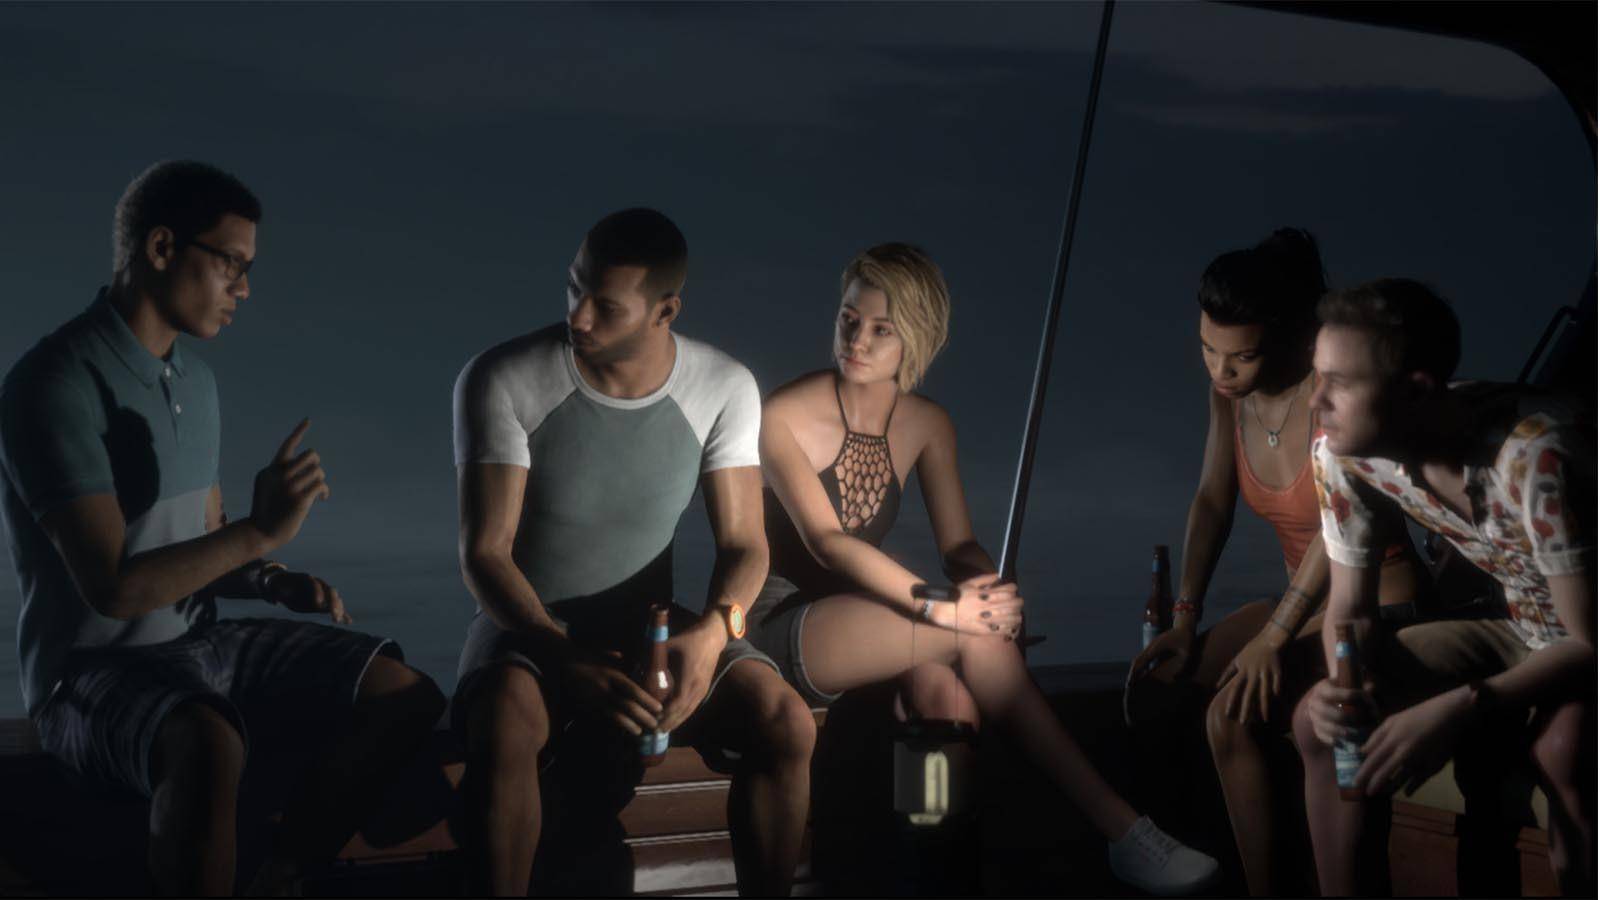 Man of Medan can be played for free via the Friend's Pass